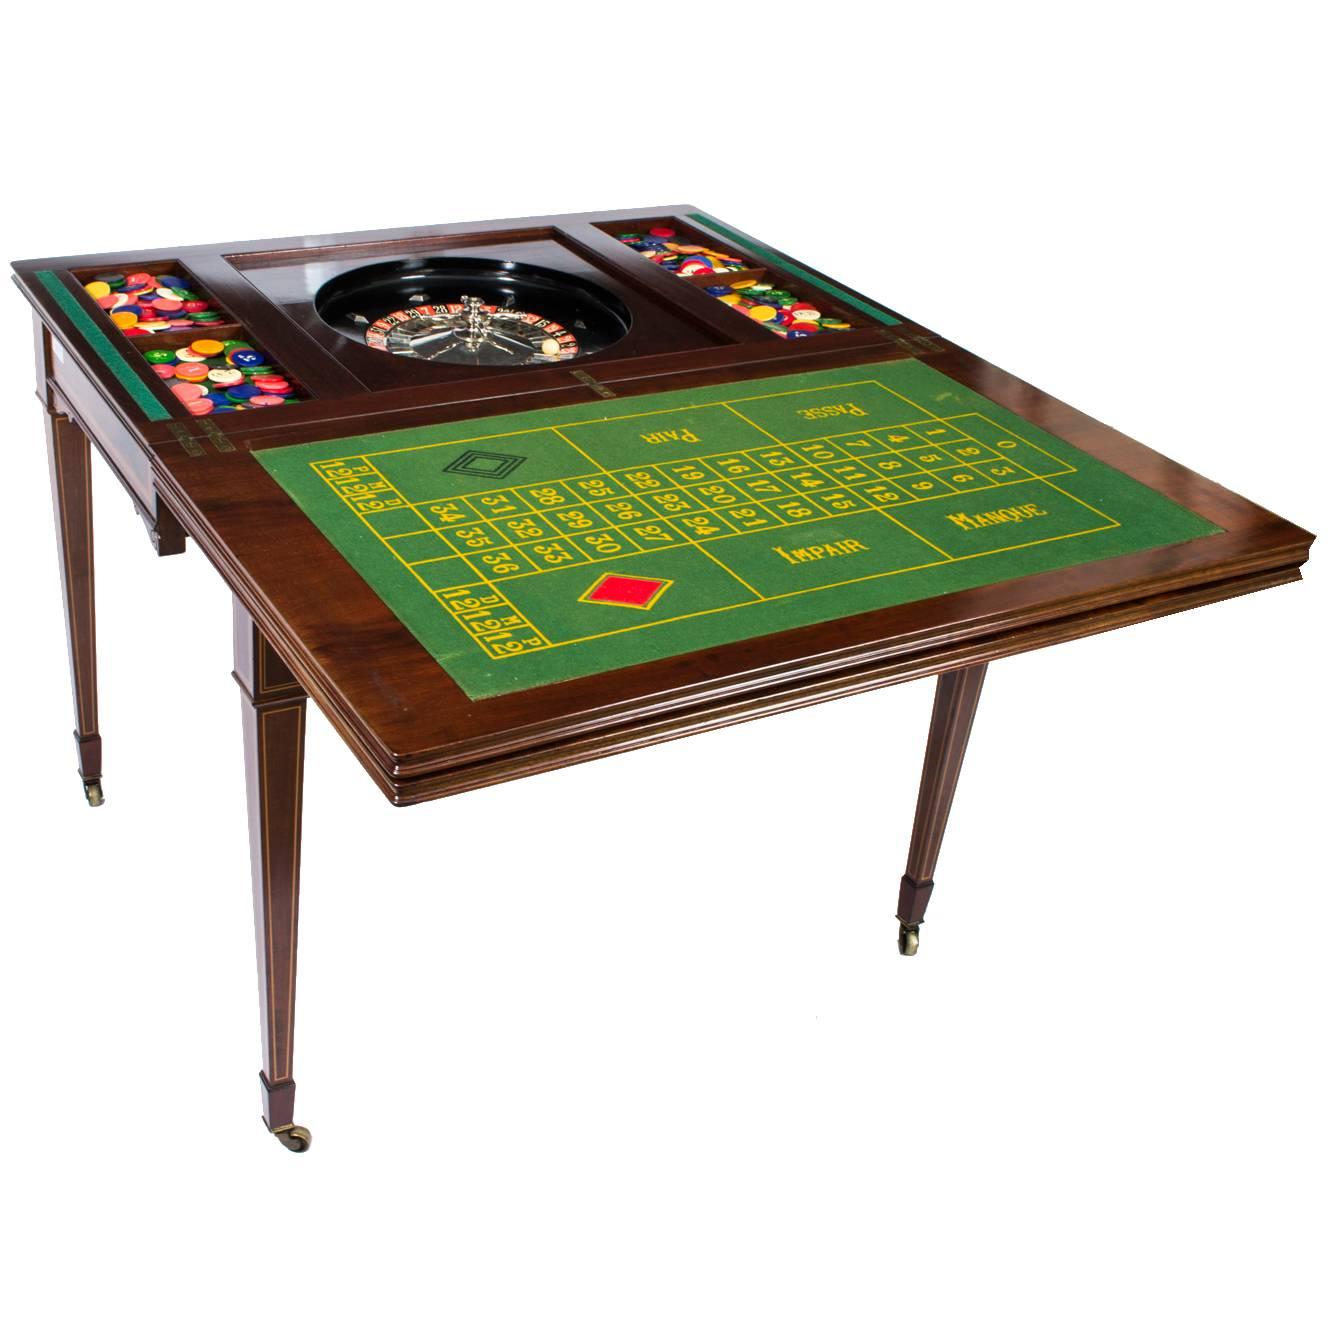 Antique Edwardian Mahogany Games Roulette Table, circa 1900